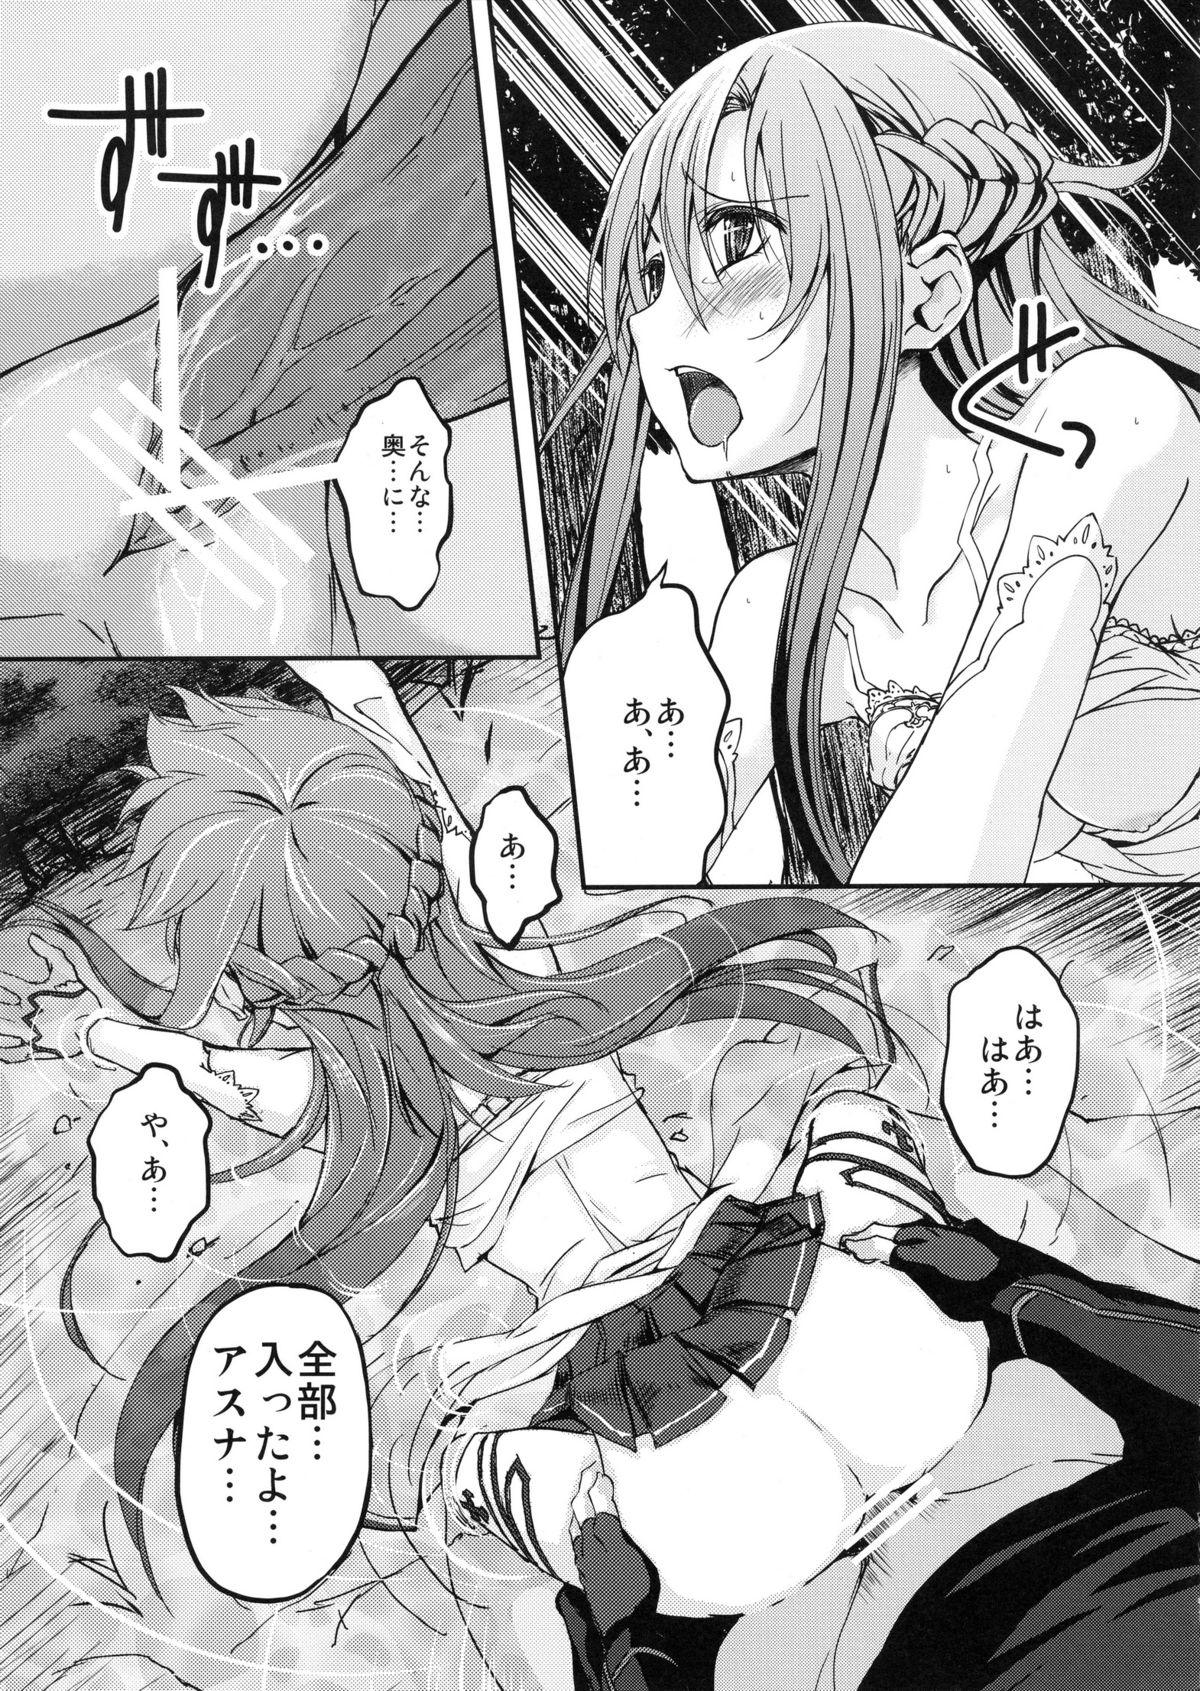 Porno 18 Marriage Experience - Sword art online Shecock - Page 8